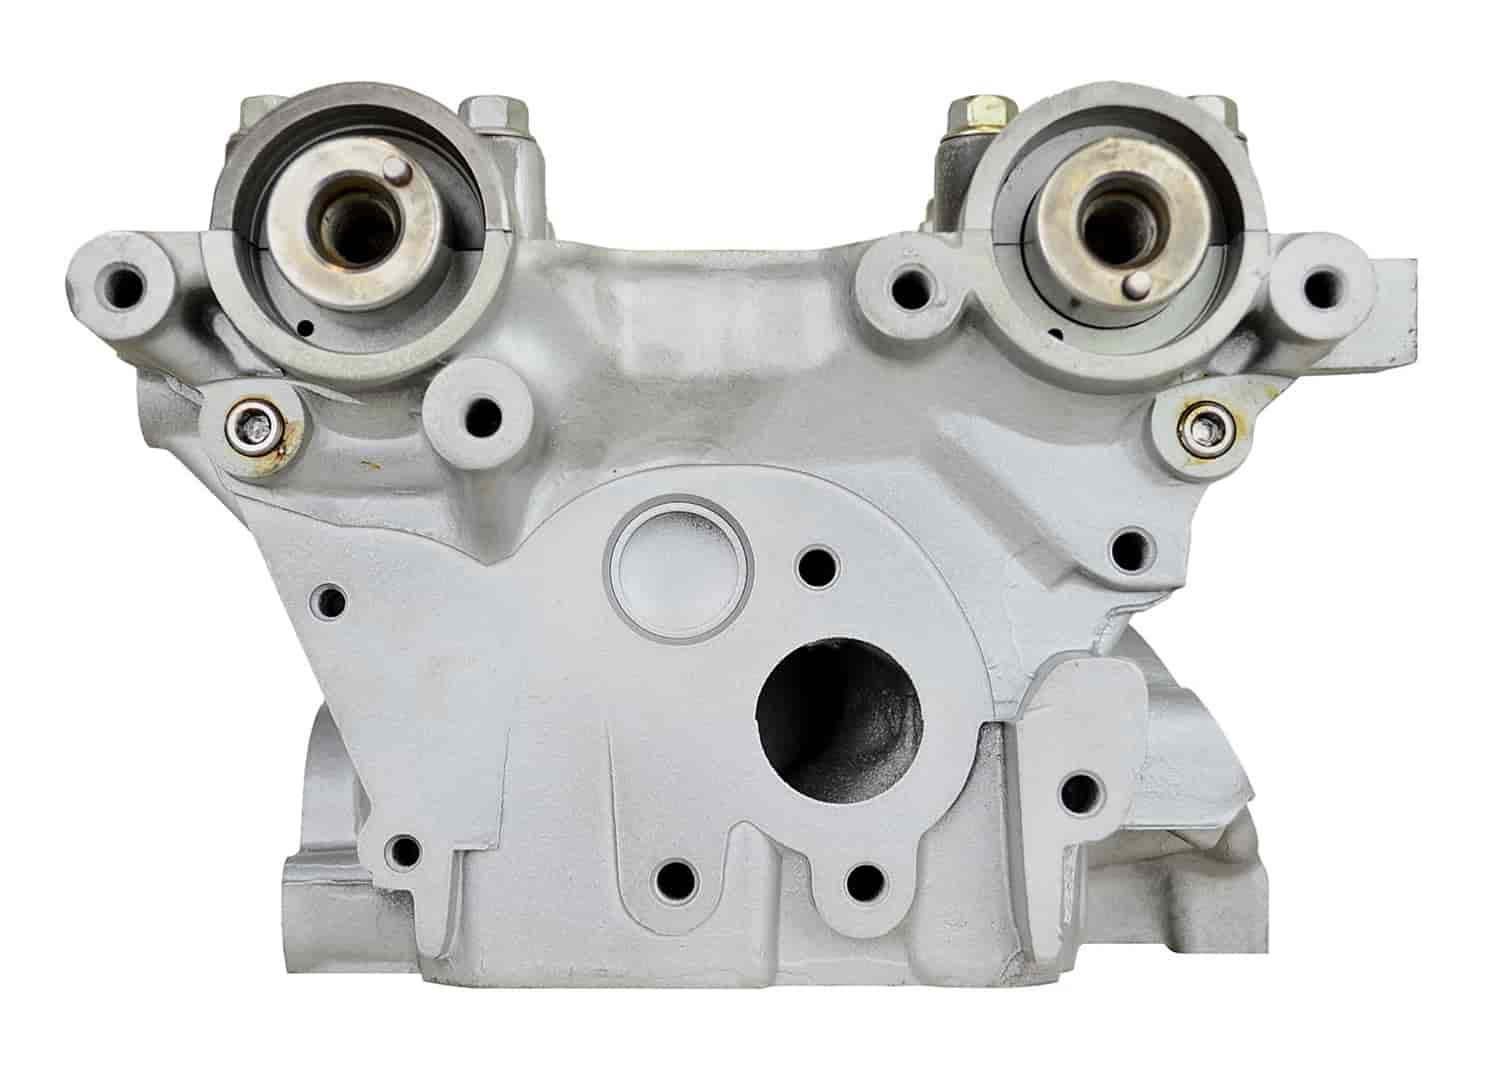 Remanufactured Cylinder Head for 2002-2006 Hyundai/Kia with 3.5L V6